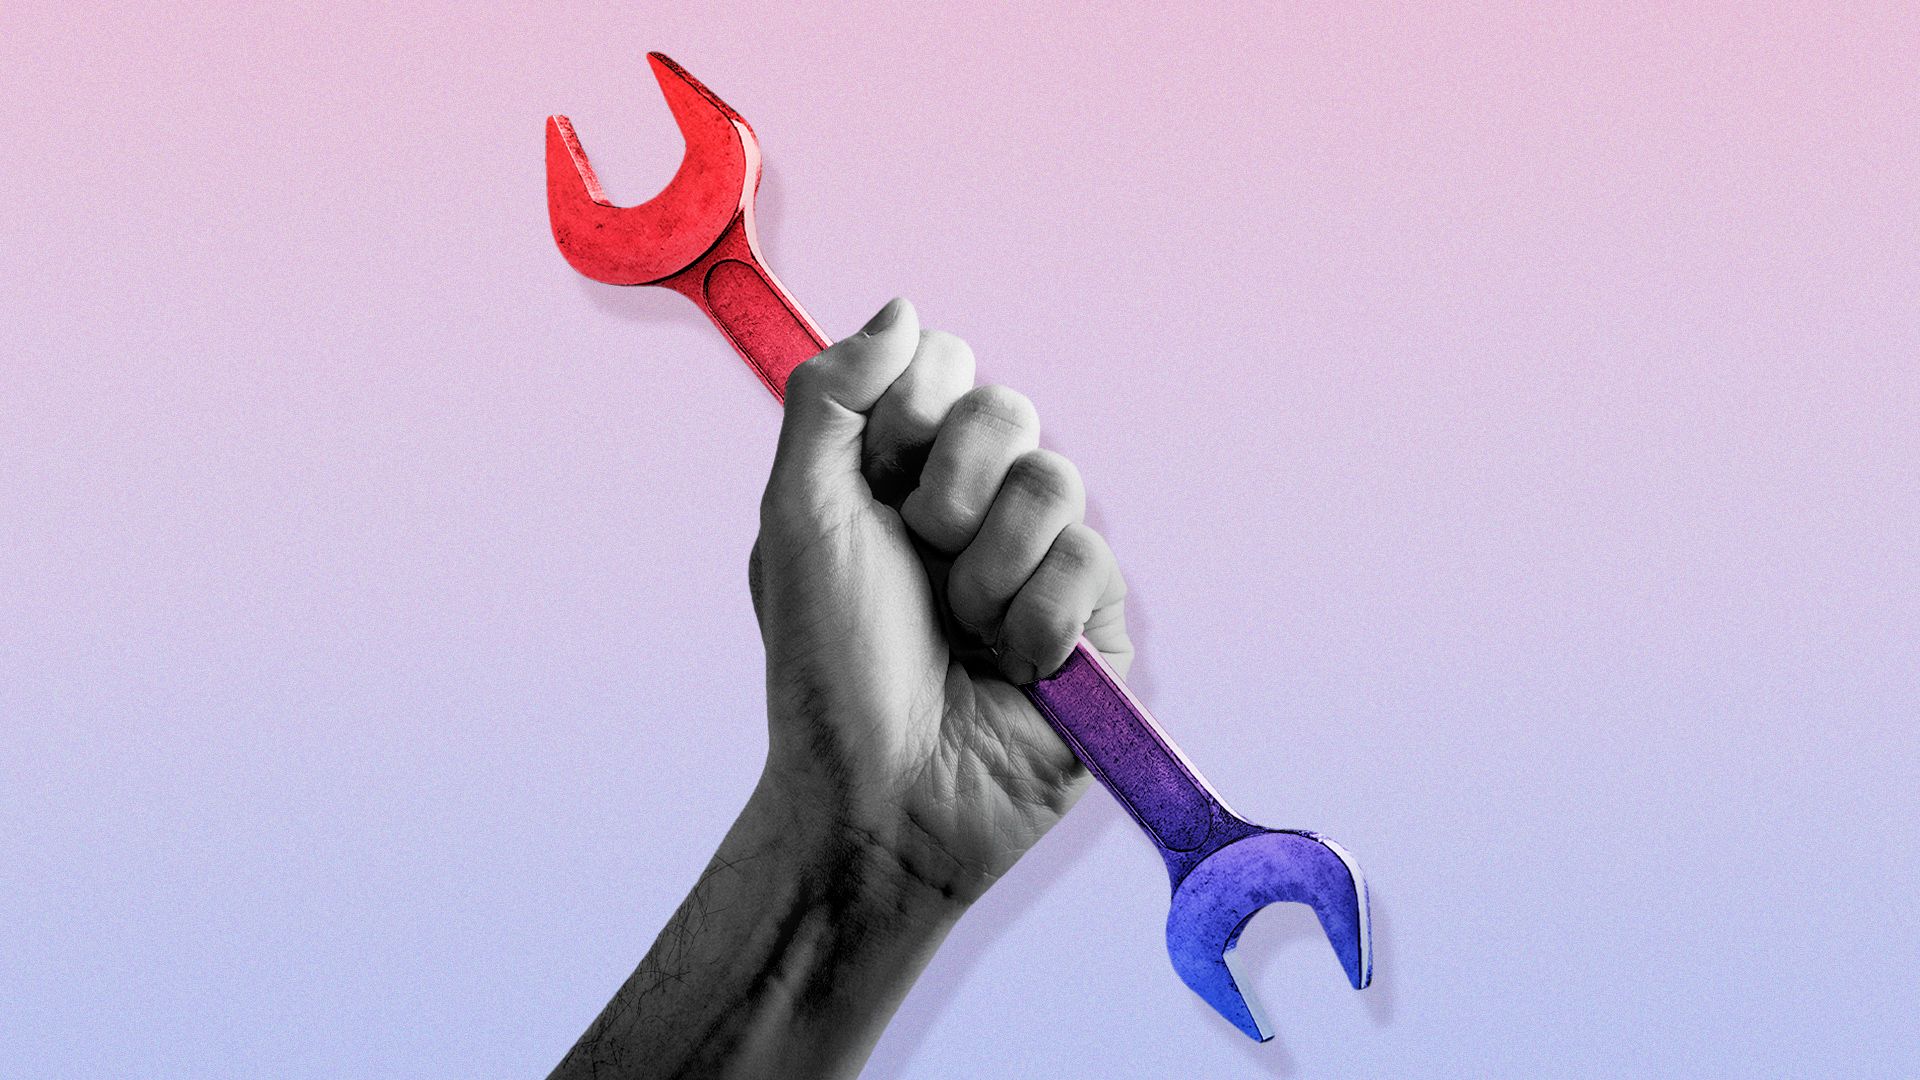 Illustration of a hand holding a wrench that is shifting in color from blue to red.